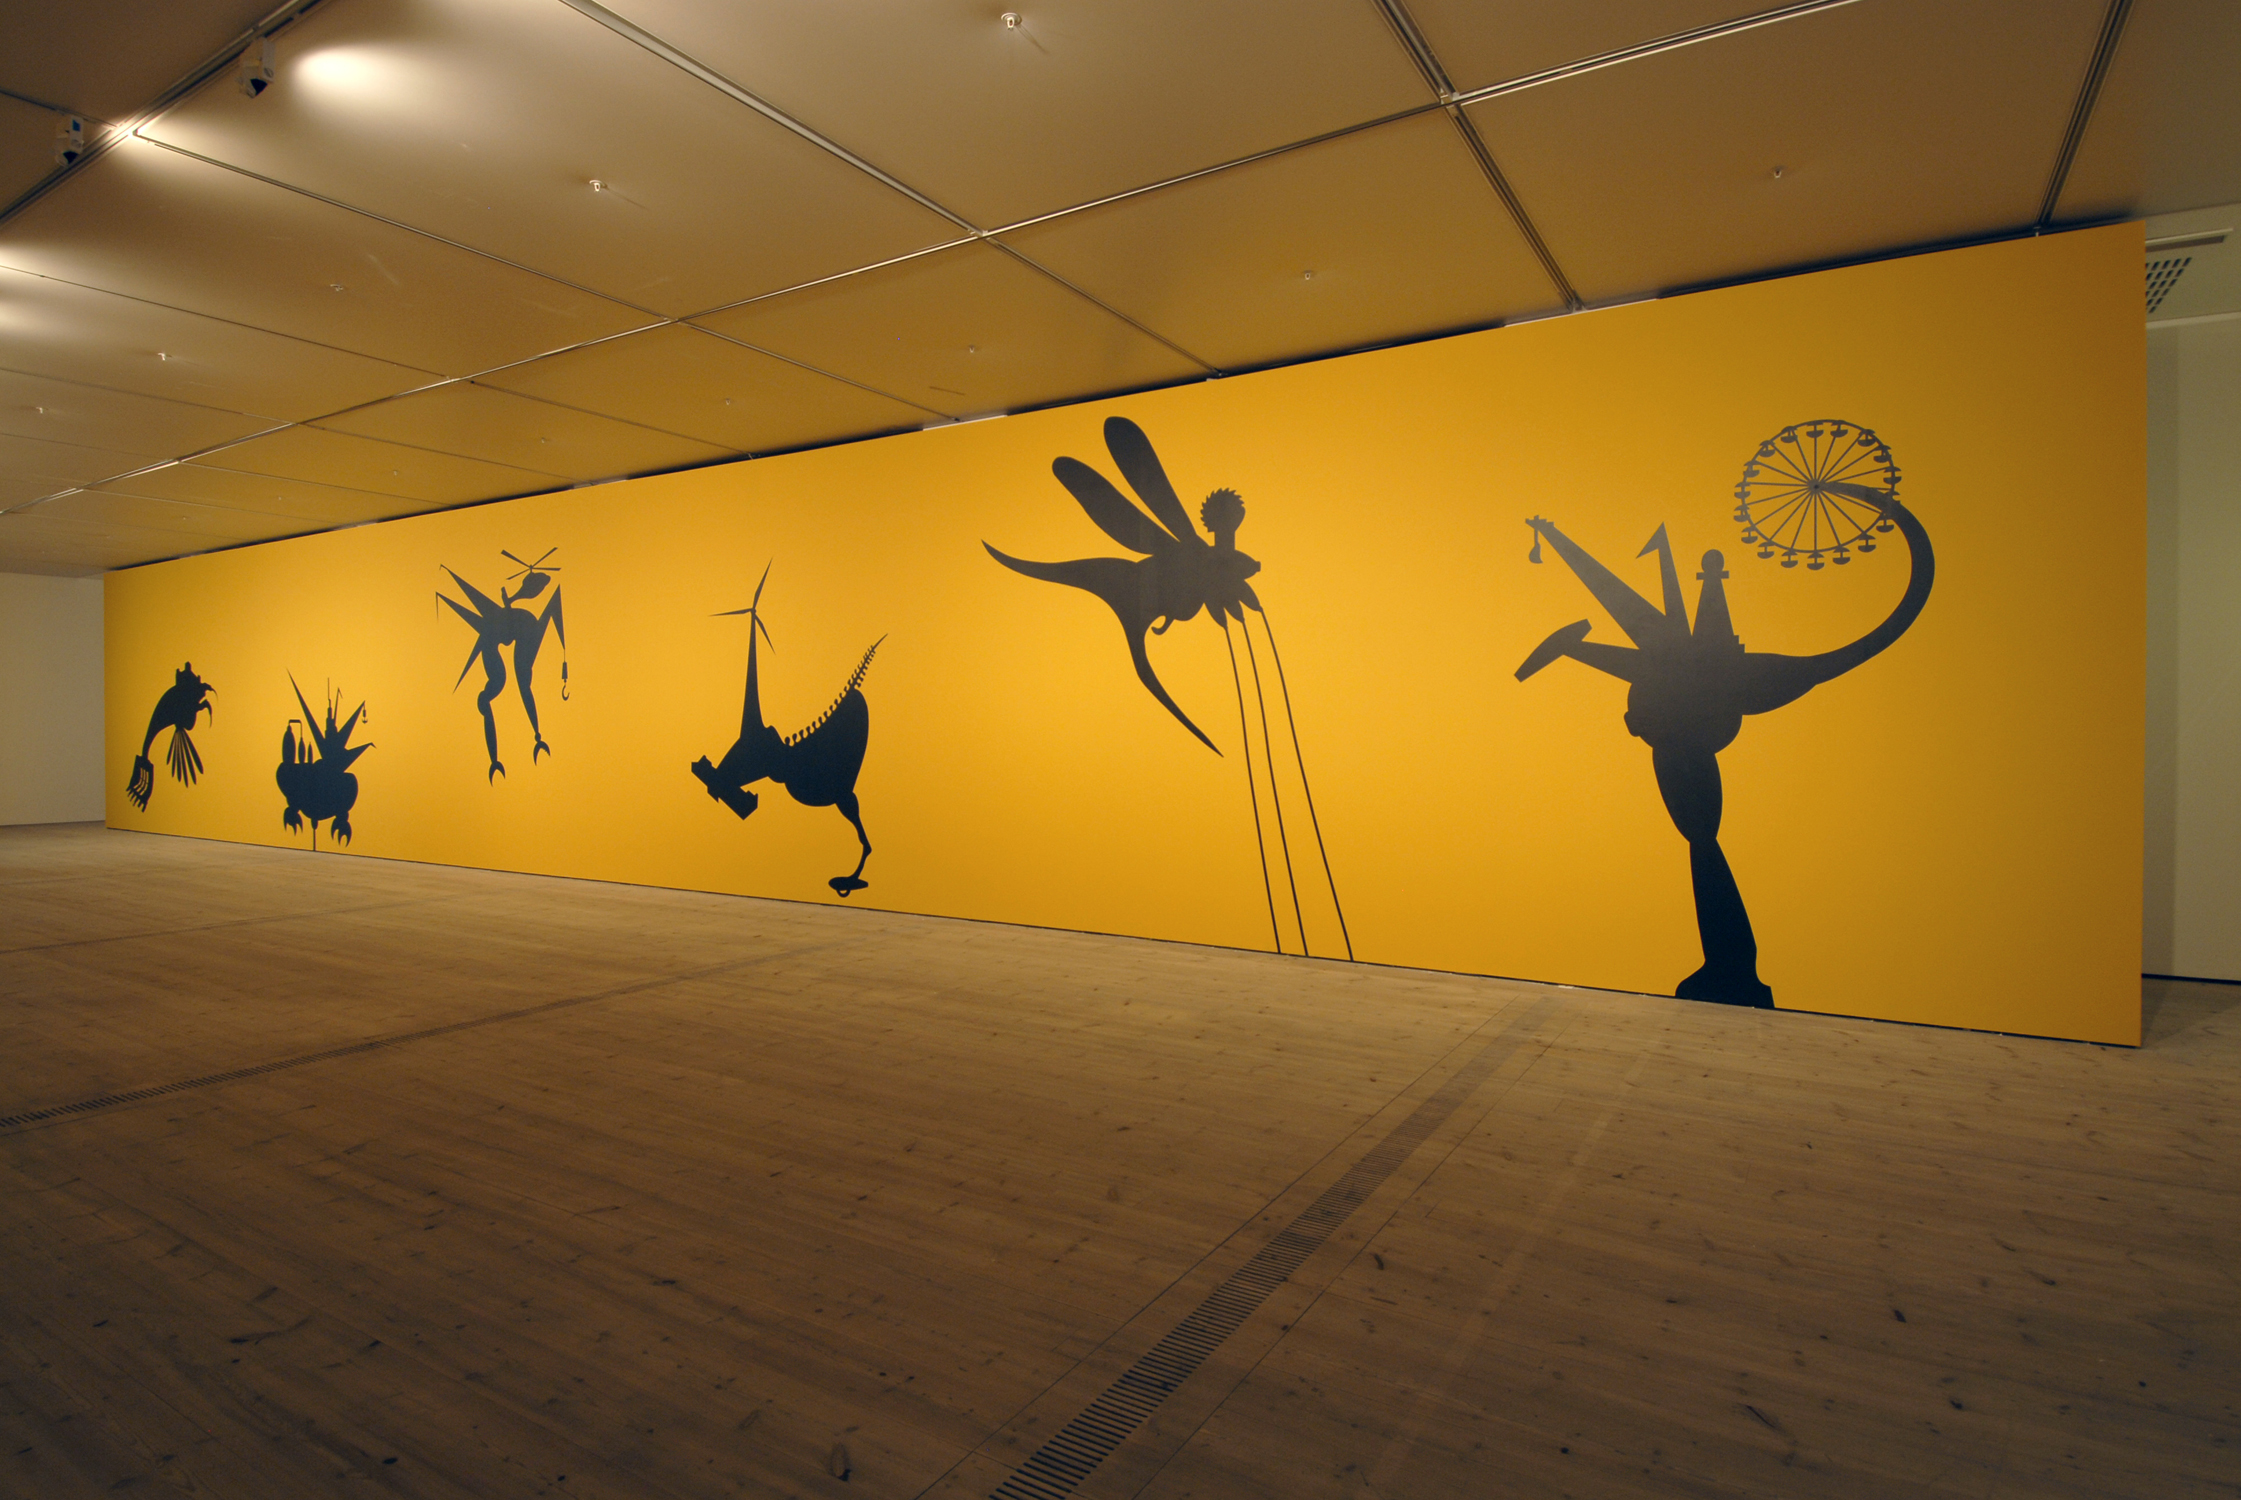   The
Bride Stripped Bare by Her Energy's' Evil, 2006, two large scale wall paintings
(10 m each + acrylic colors), audio elements and a projected short 3D animated
film, &nbsp;2 min. 44 sec. Installation view
at BALTIC Centre for Contemporary Art, G